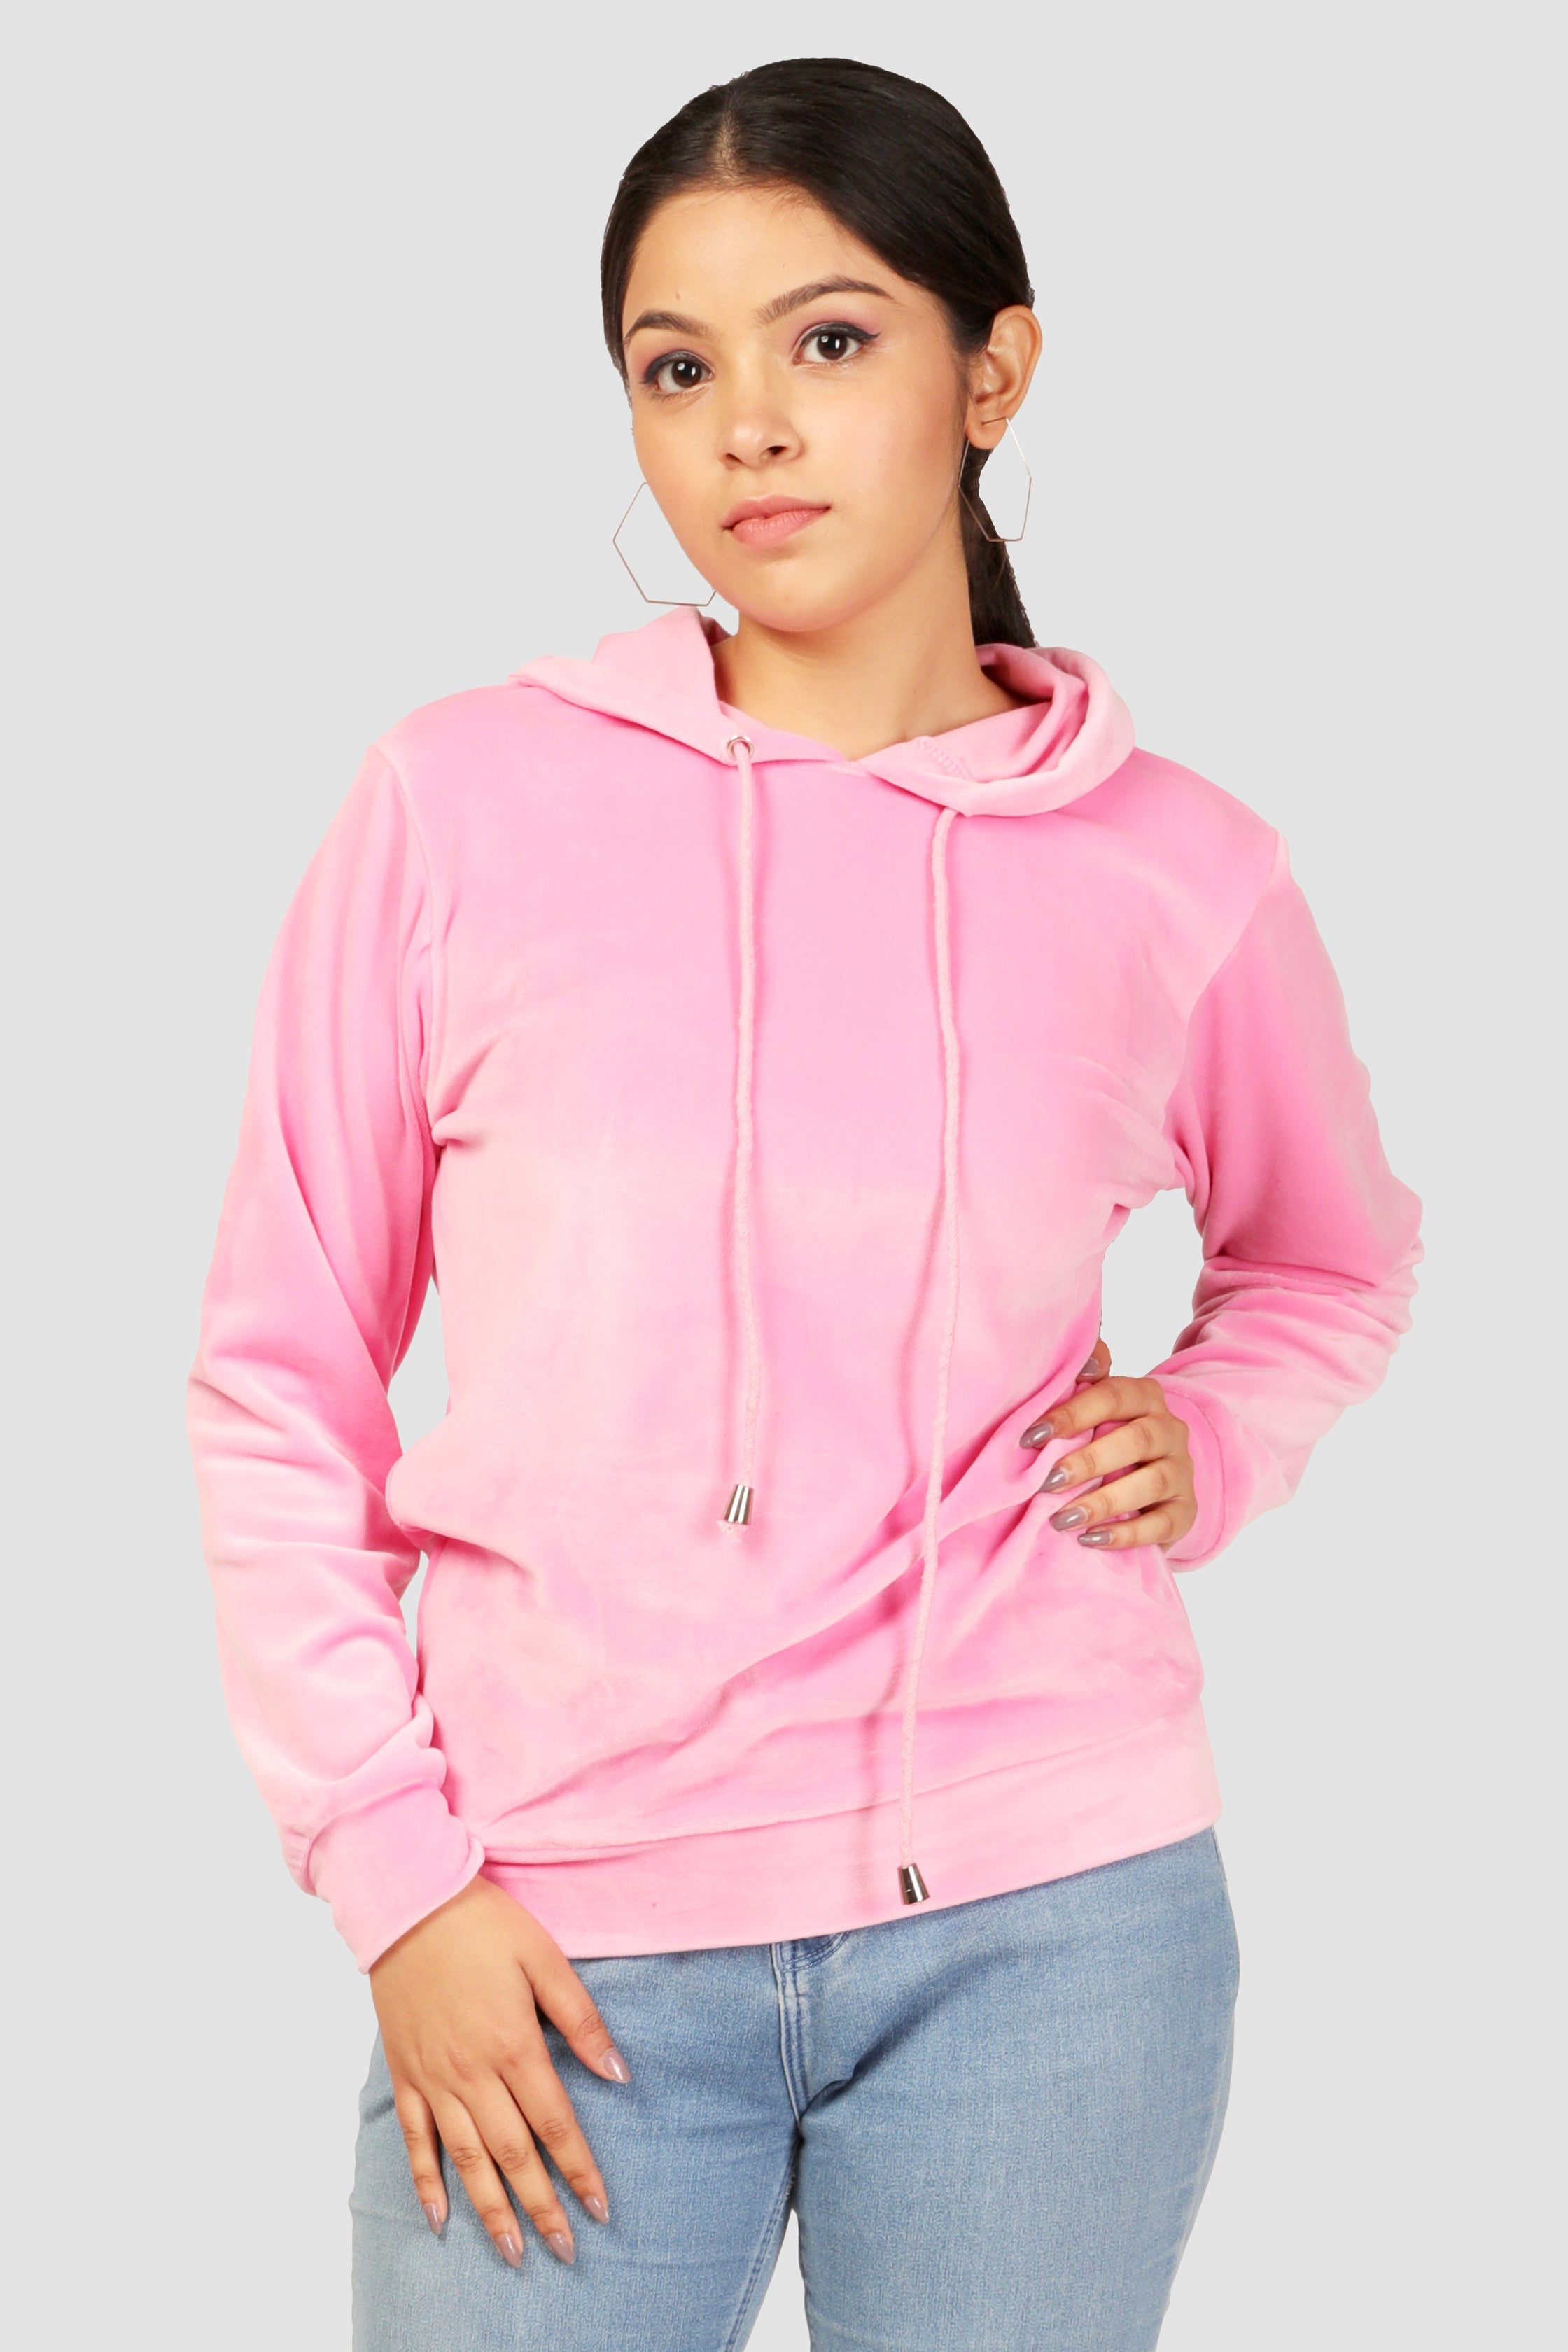 WALLY - PINK VELOUR SOLID WOMENS HOODIE